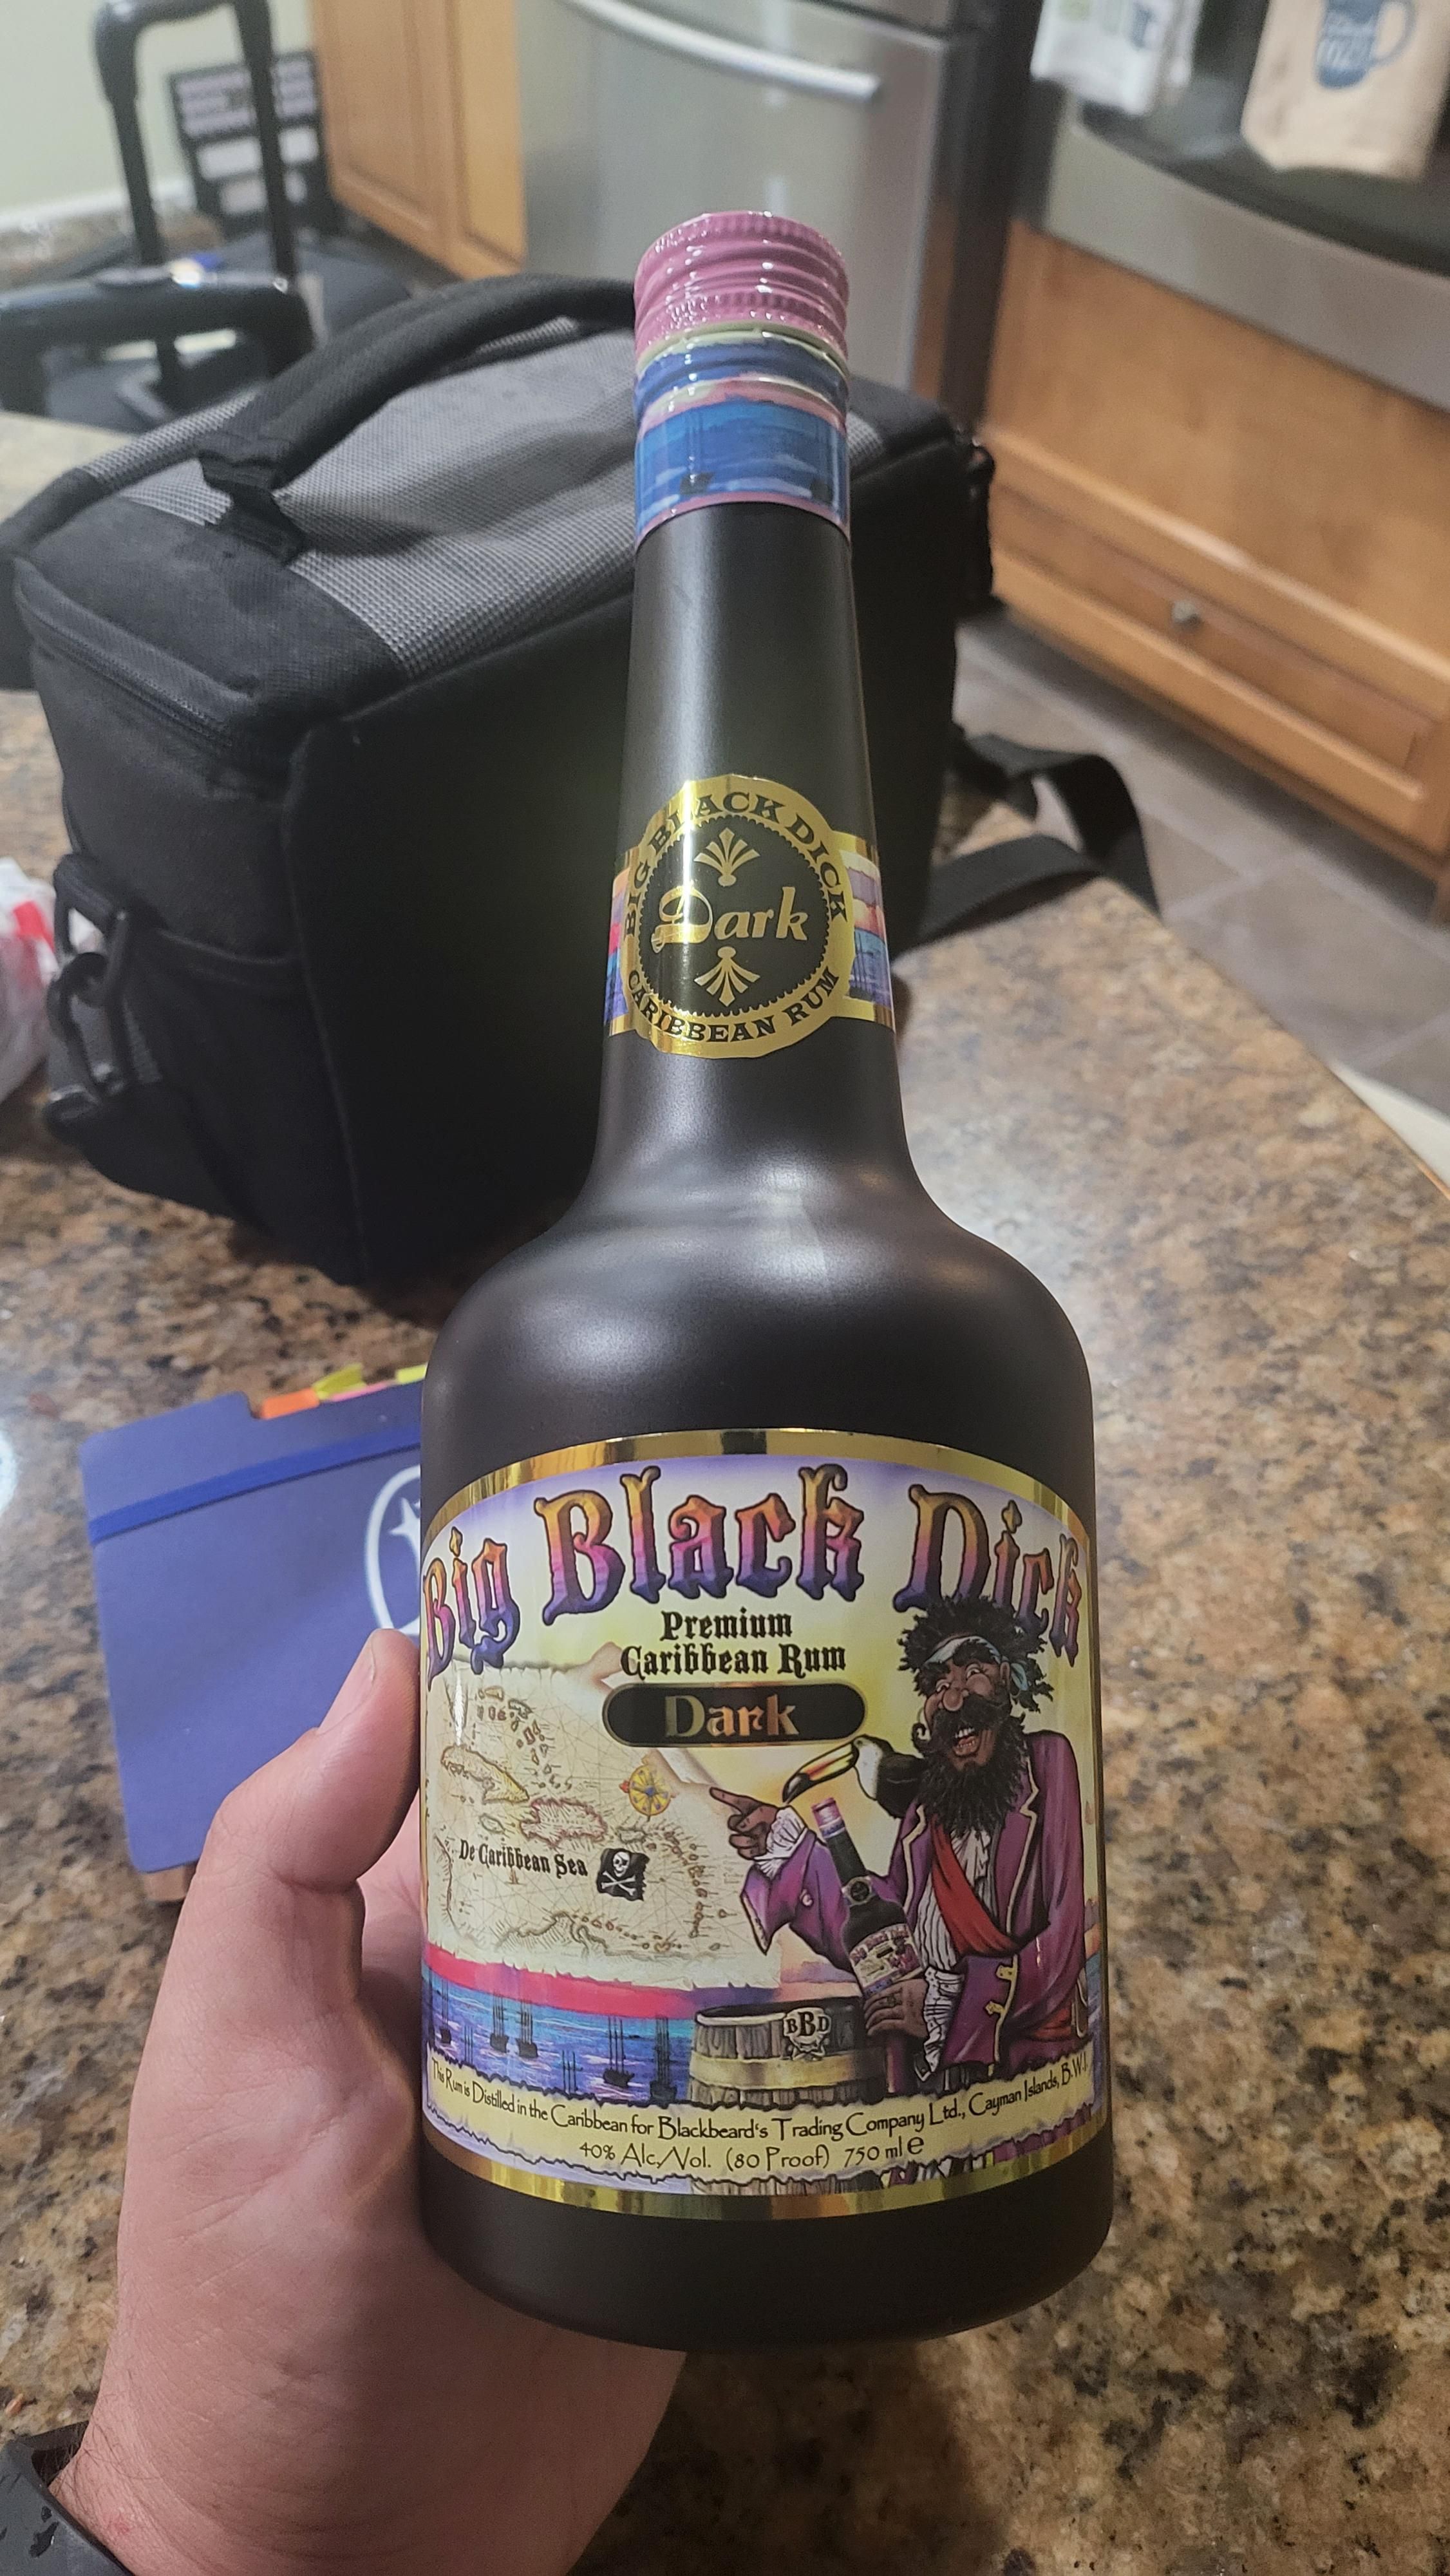 my parents got me a bottle of rum while they were on a cruise. English is not their first language.